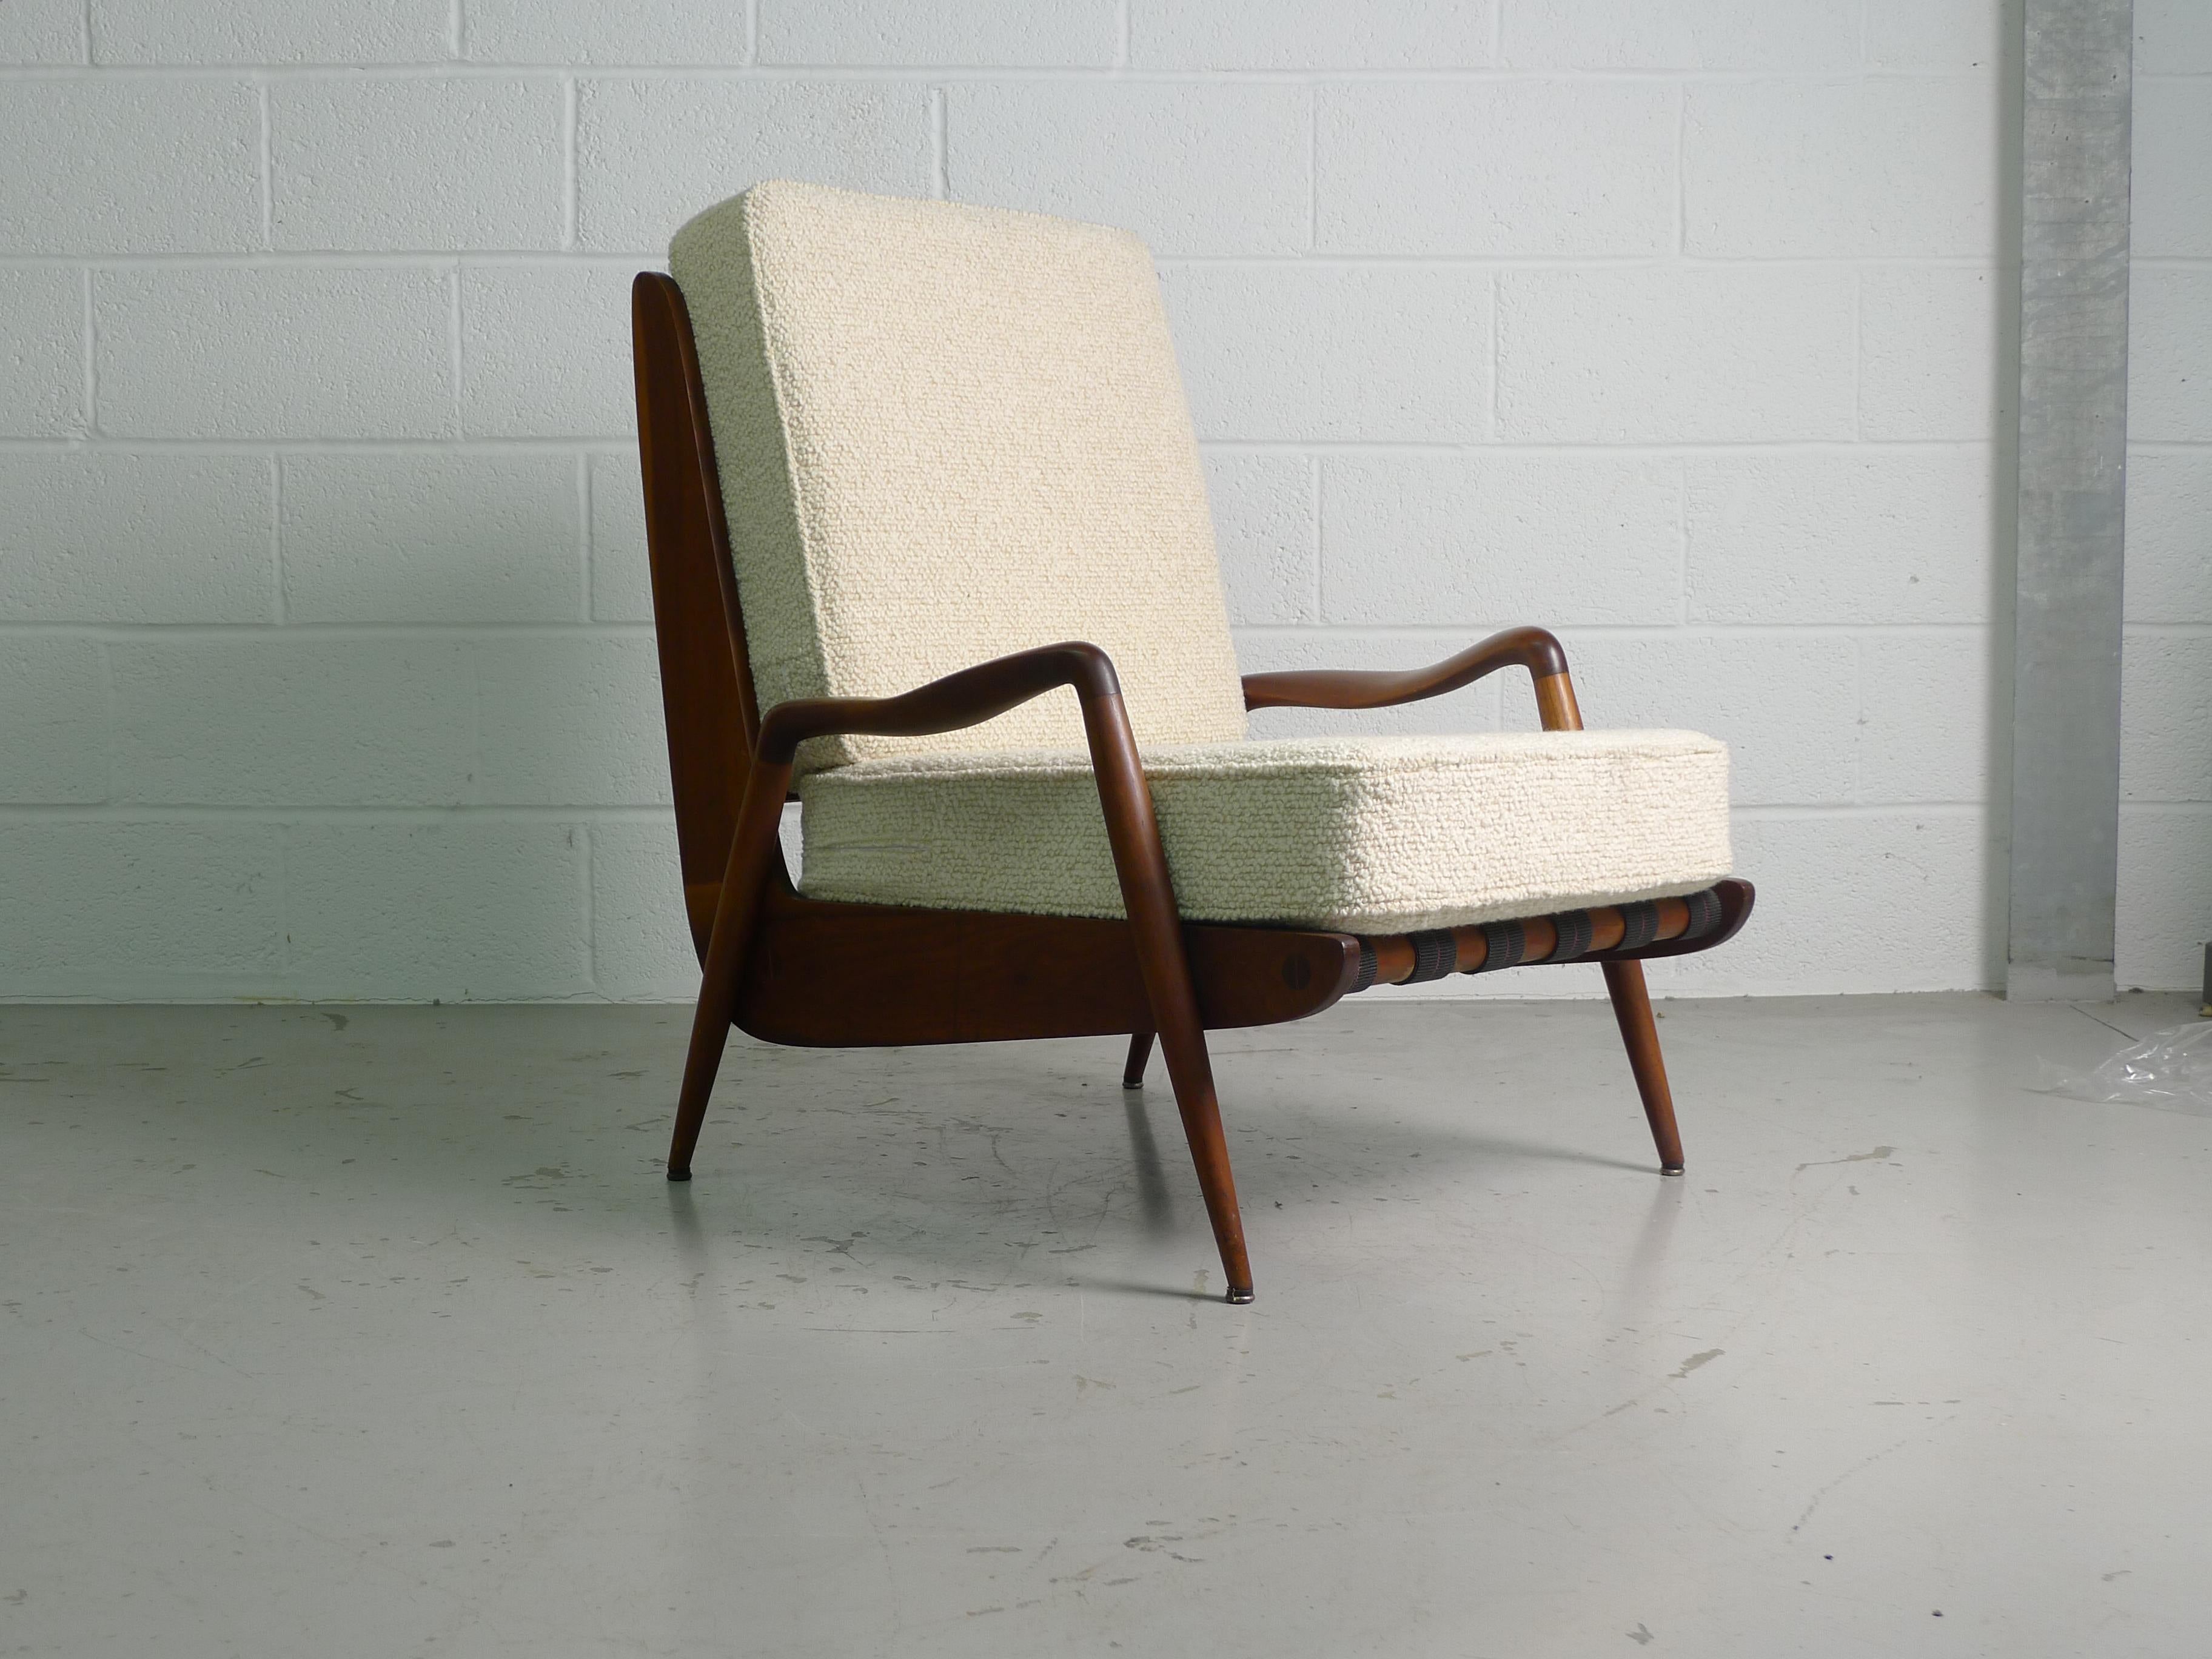 Phillip Lloyd Powell, 1960s, lounge chair in American Walnut and newly reupholstered nubbly wool fabric cushions.

Sculpted arms contribute to a beautiful overall form.